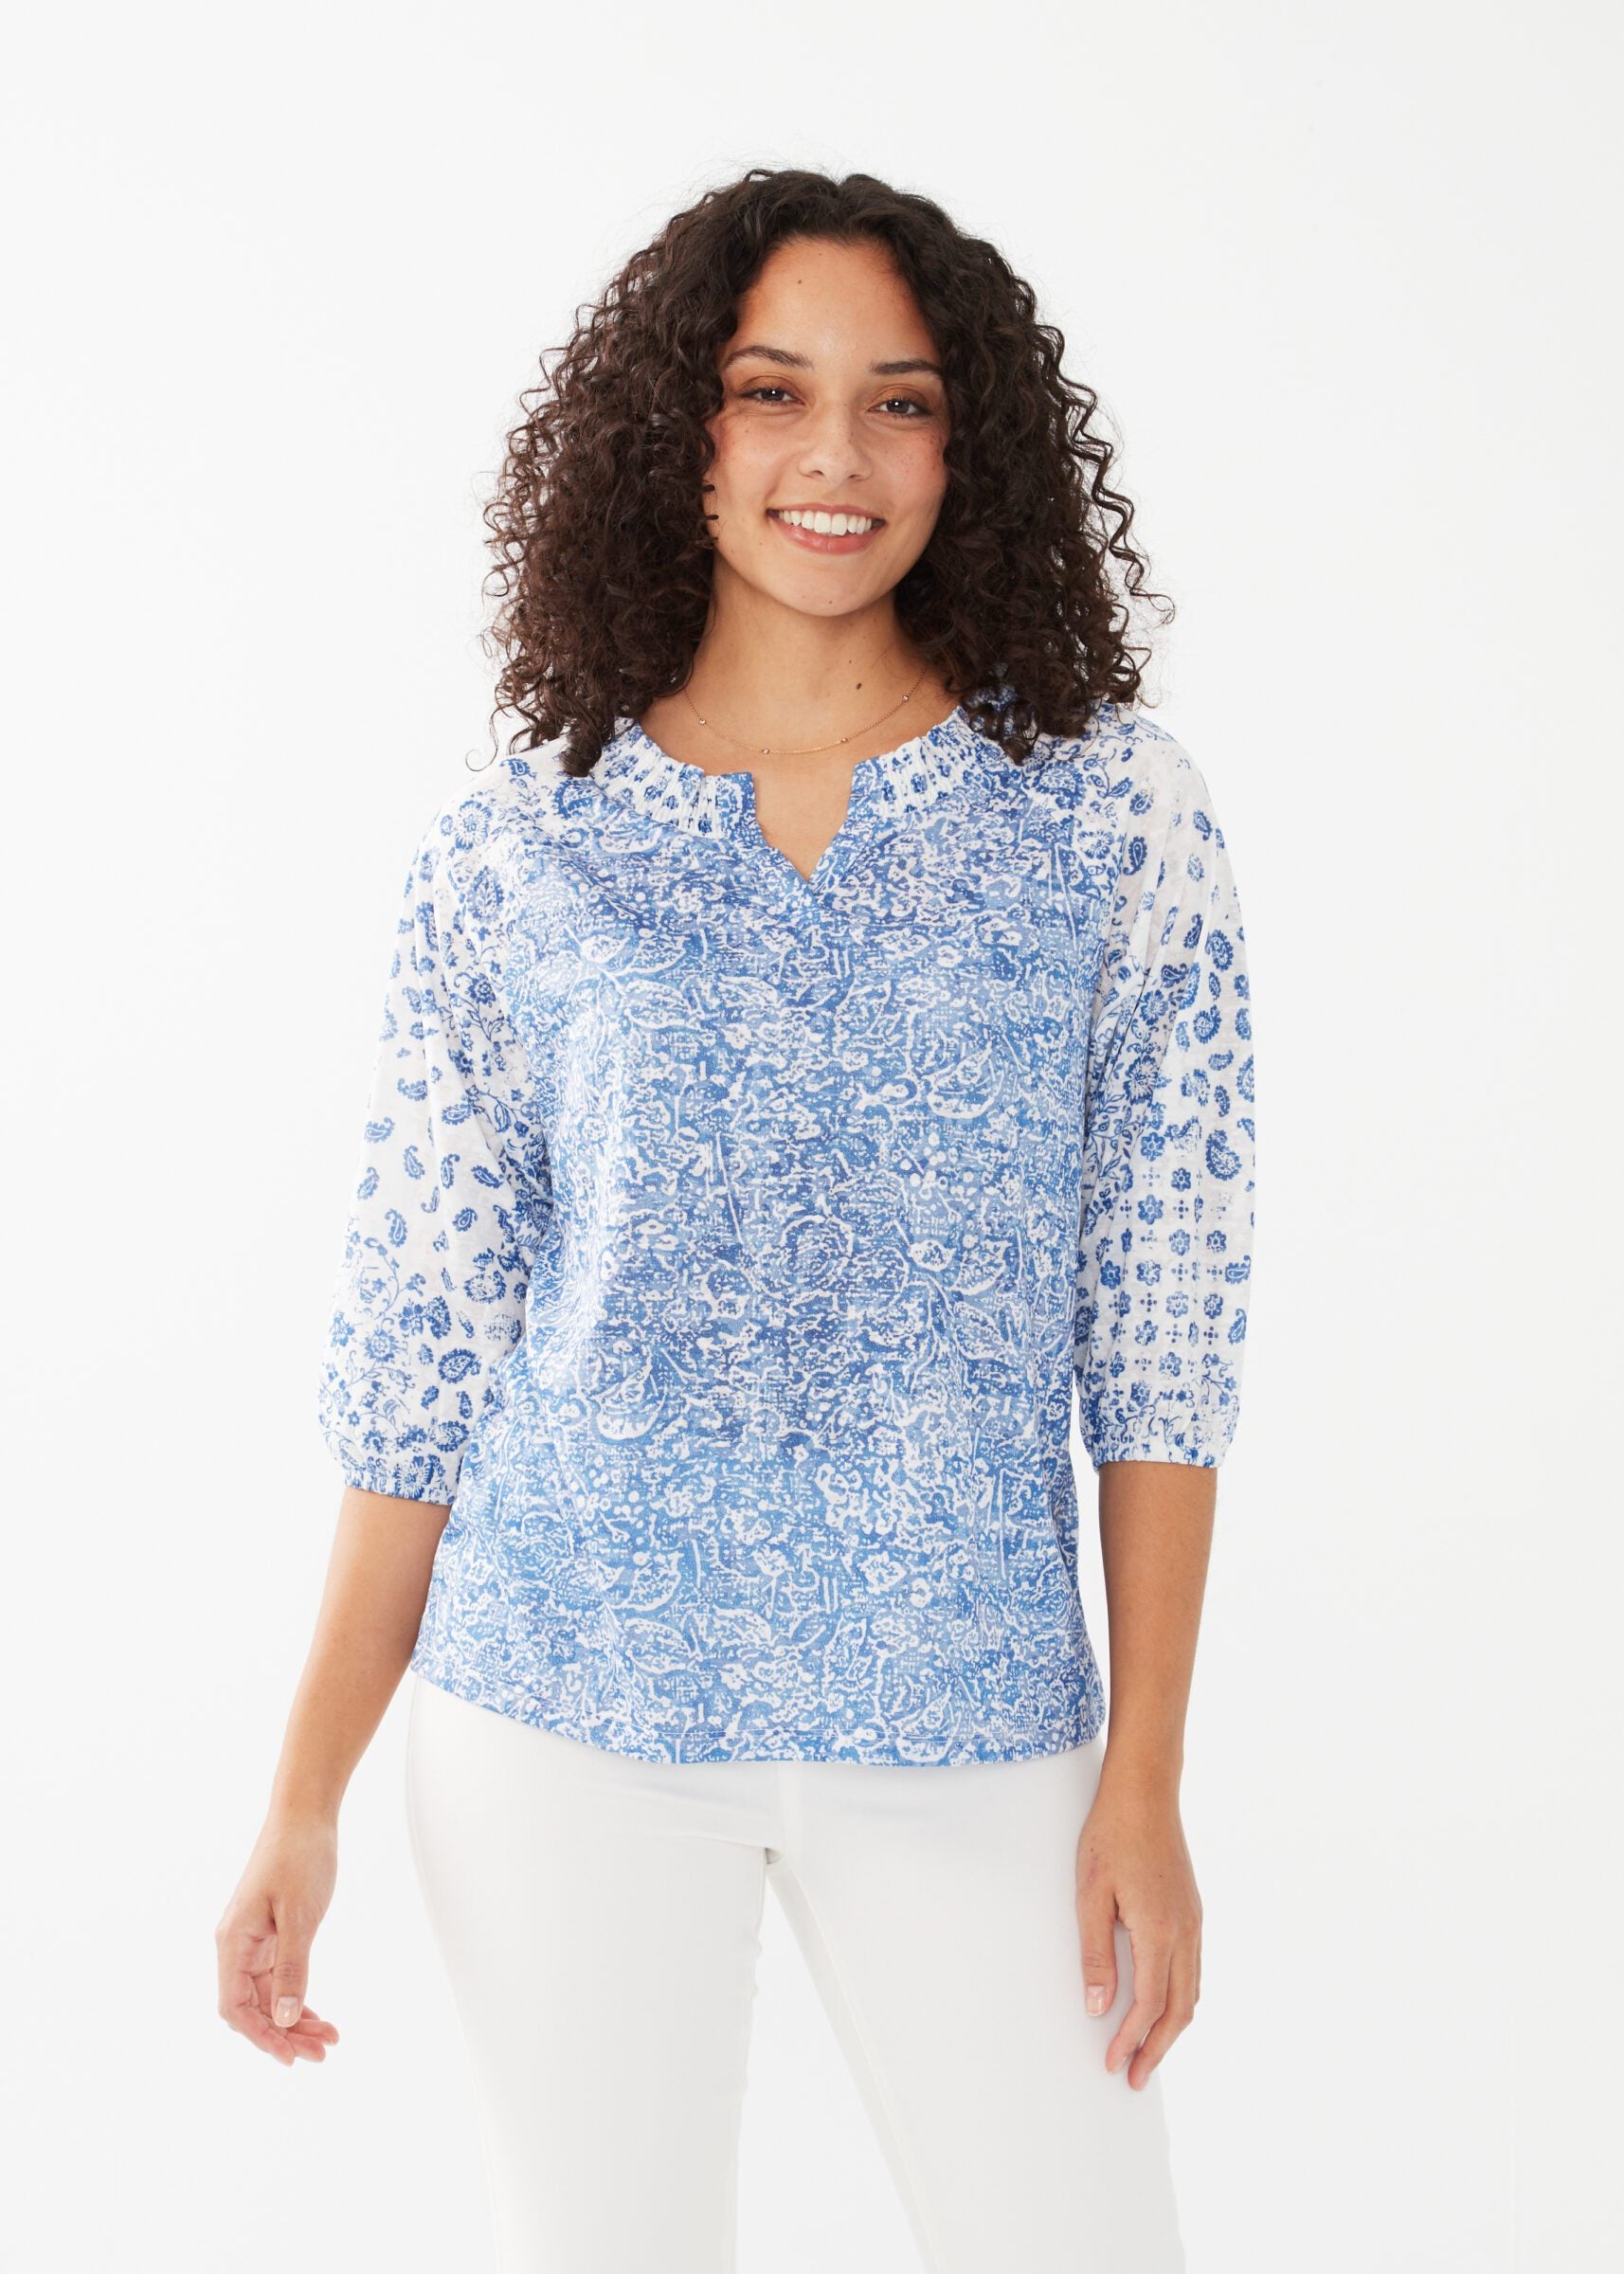 Experience the perfect blend of style and comfort with our FDJ V-neck Peasant Top. This 3/4 sleeve top features a unique and trendy v-neck design, perfect for everyday wear. Look effortlessly chic while feeling comfortable and confident.